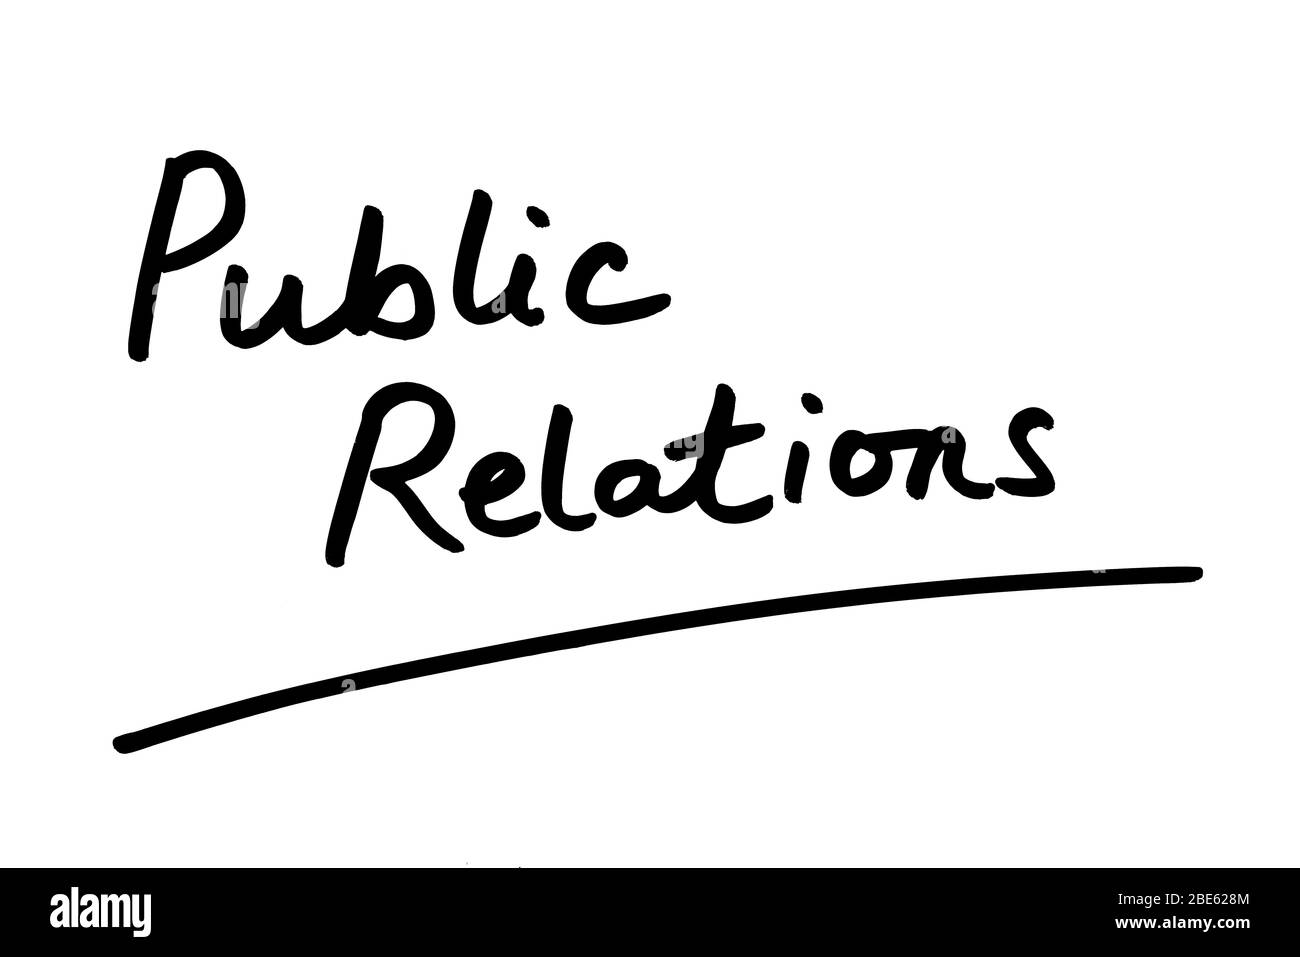 Public Relations handwritten on a white background. Stock Photo